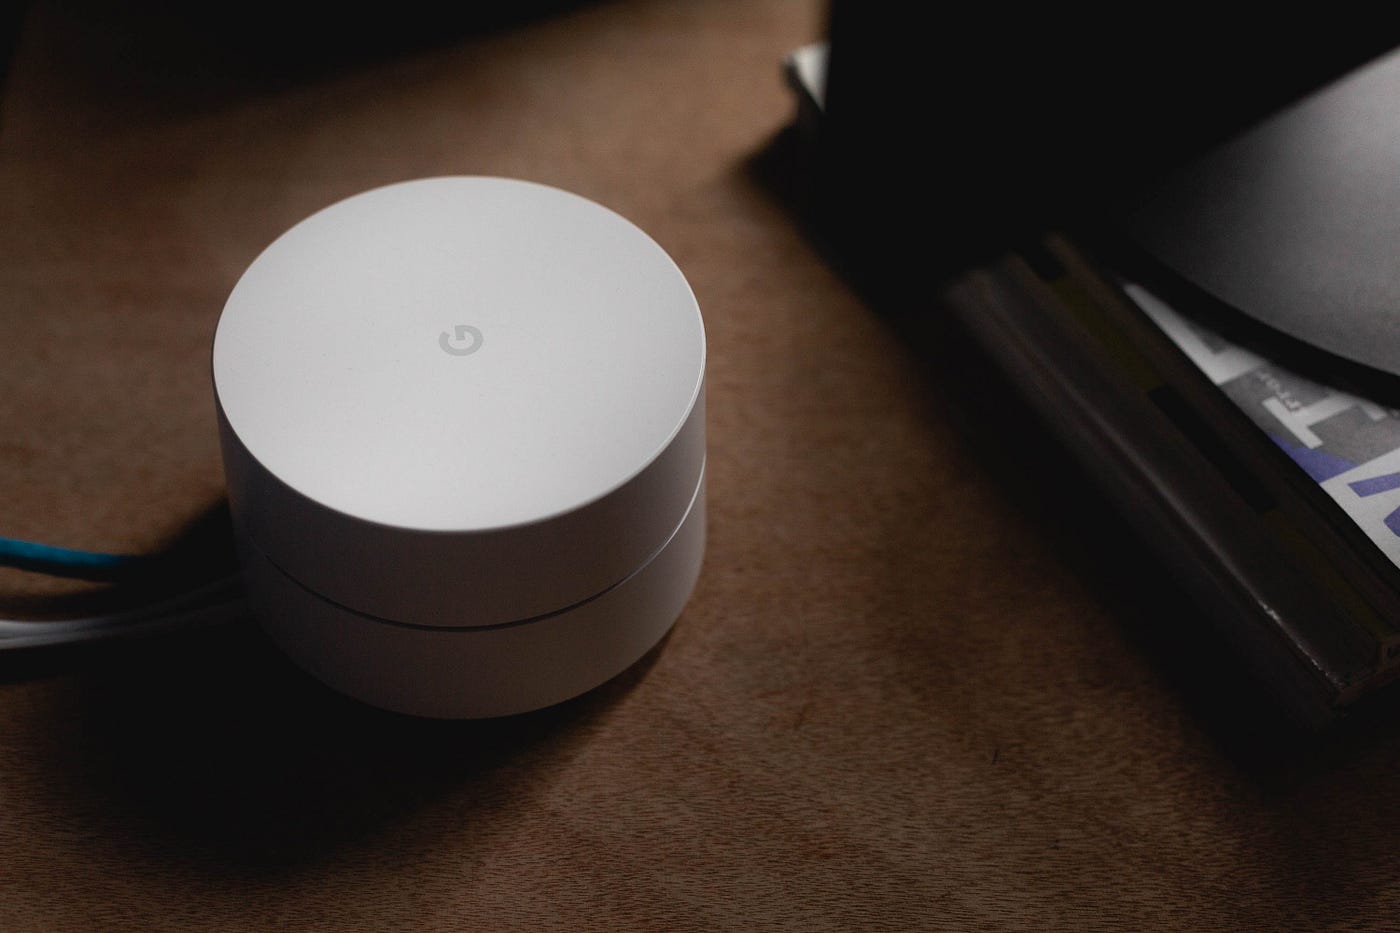 Bypass Double NAT Issues with Nest/ Google Wifi, by #hope